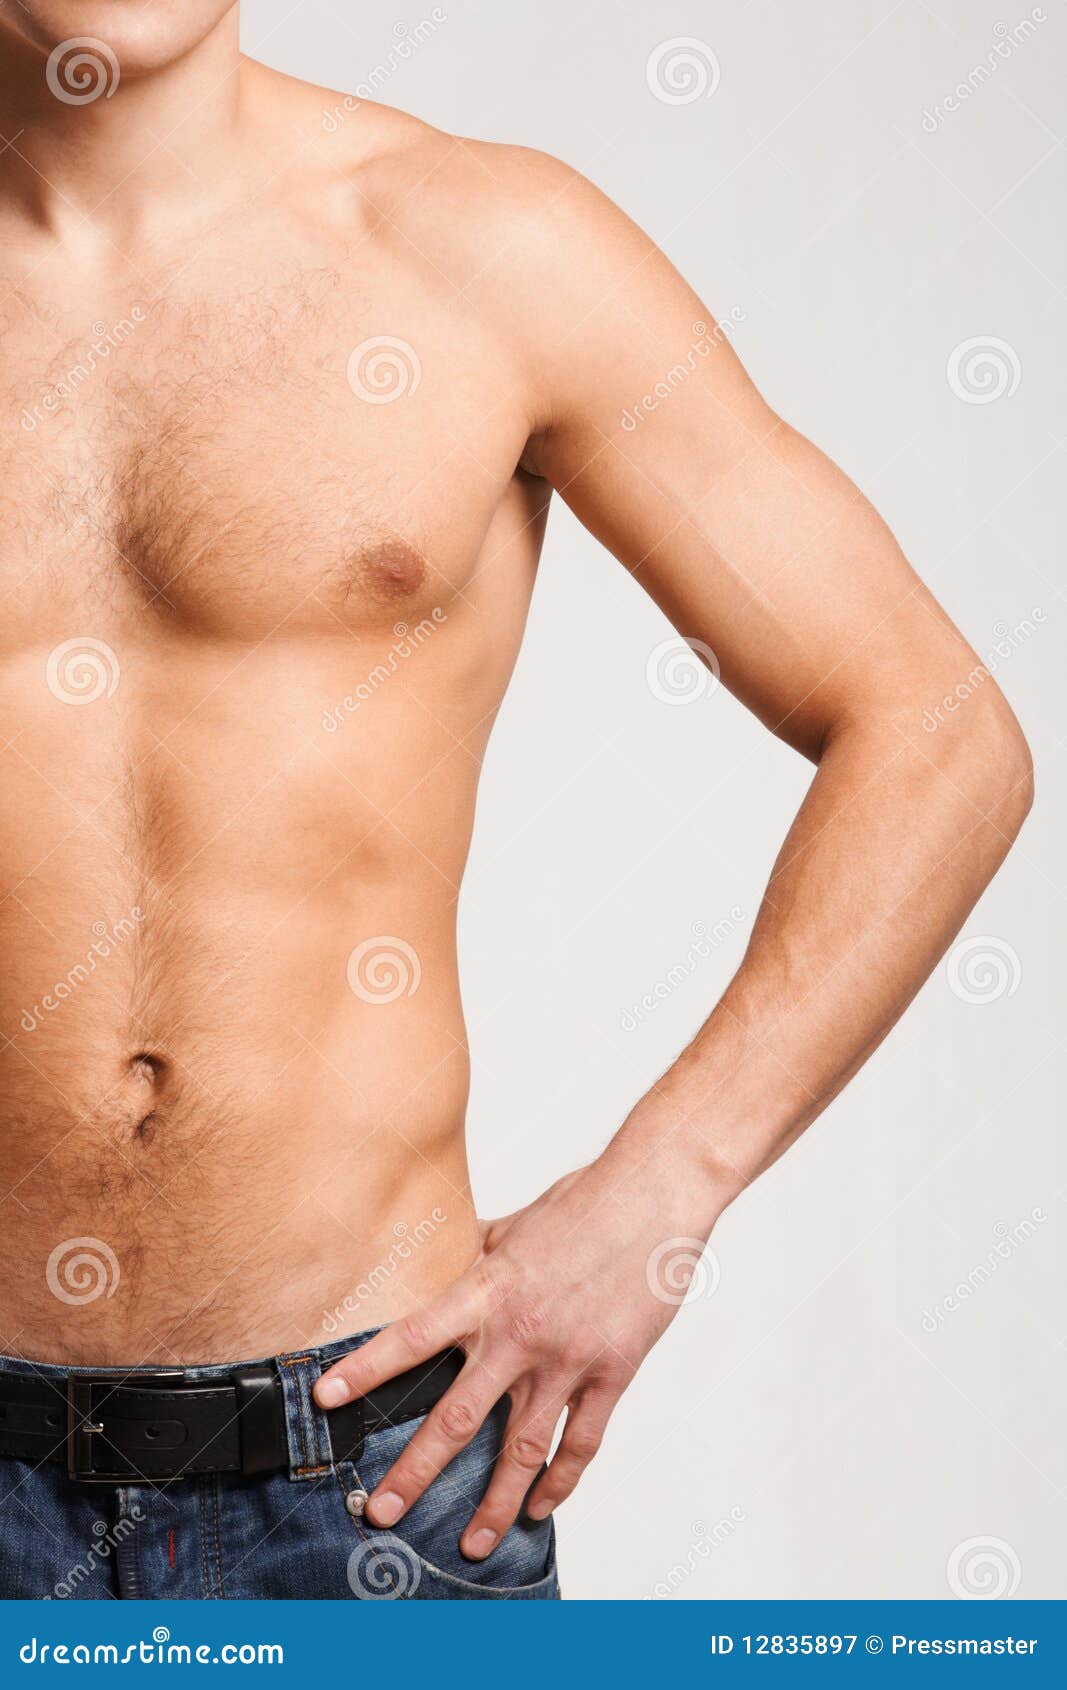 Masculinity stock image. Image of muscles, adult, lifestyle - 12835897